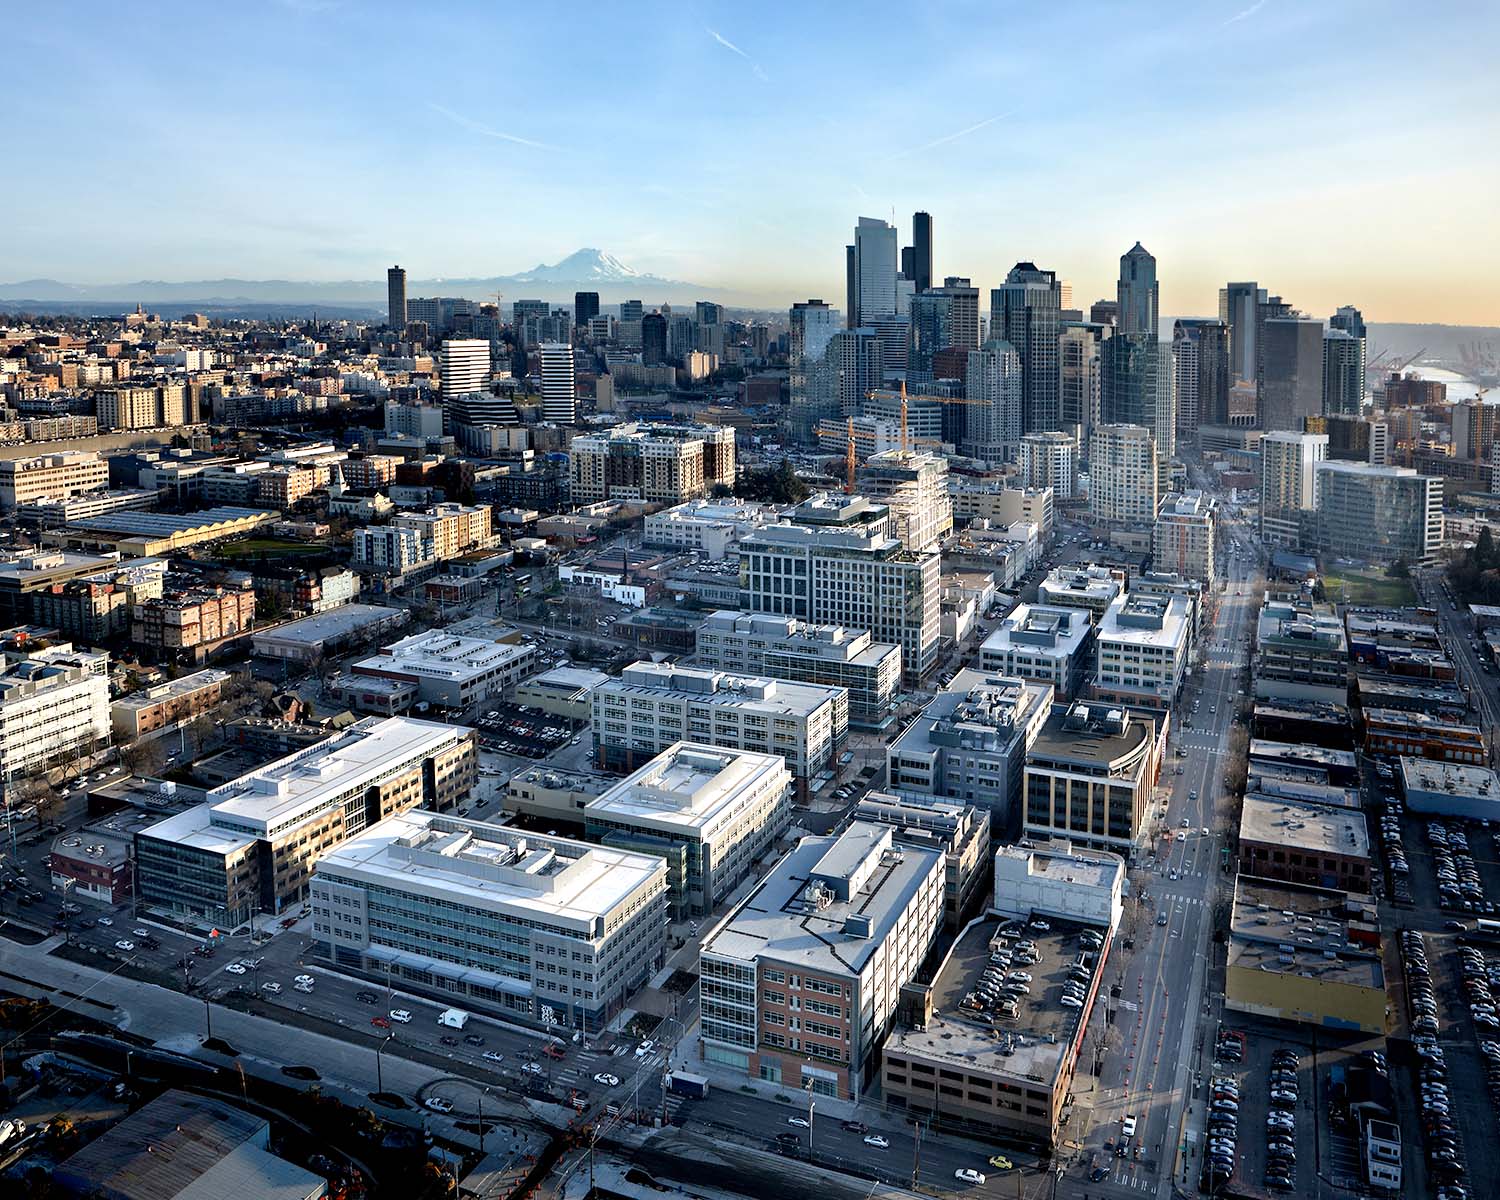 Aerial view of Amazon campus in 2012 with downtown Seattle in background